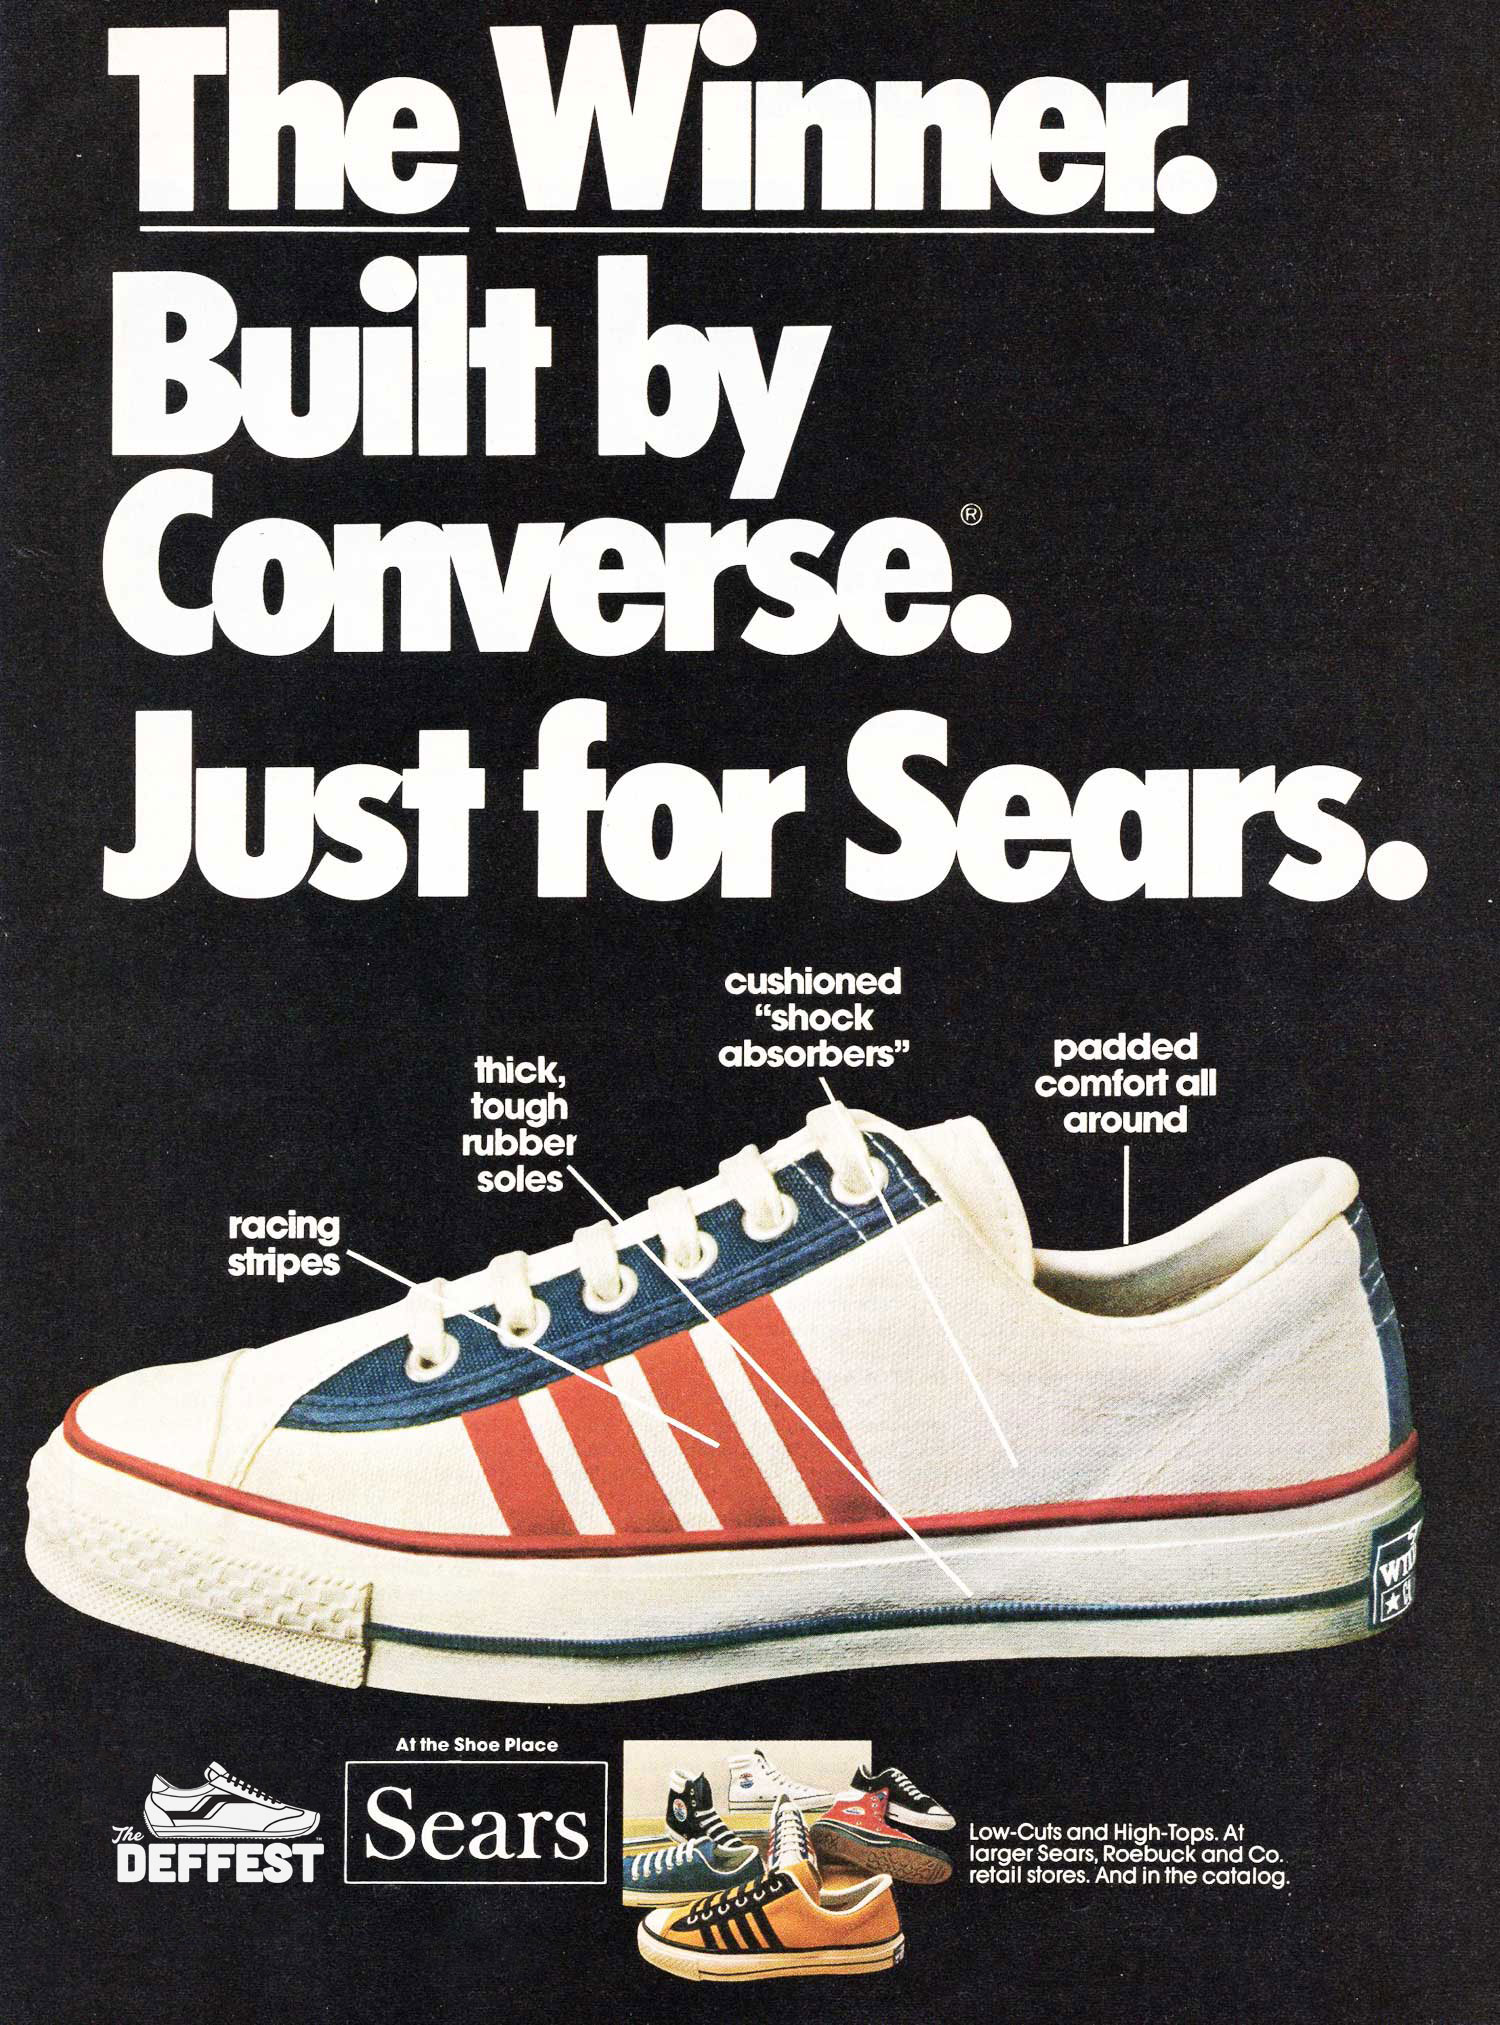 TheDeffest on X: "Here's an old school 1974 vintage print ad for the Sears  the Winner line of sneakers. Built by Converse. Just for Sears. #converse  #Sneakers https://t.co/gDkd8rFbBG https://t.co/rziebJkLZR" / X